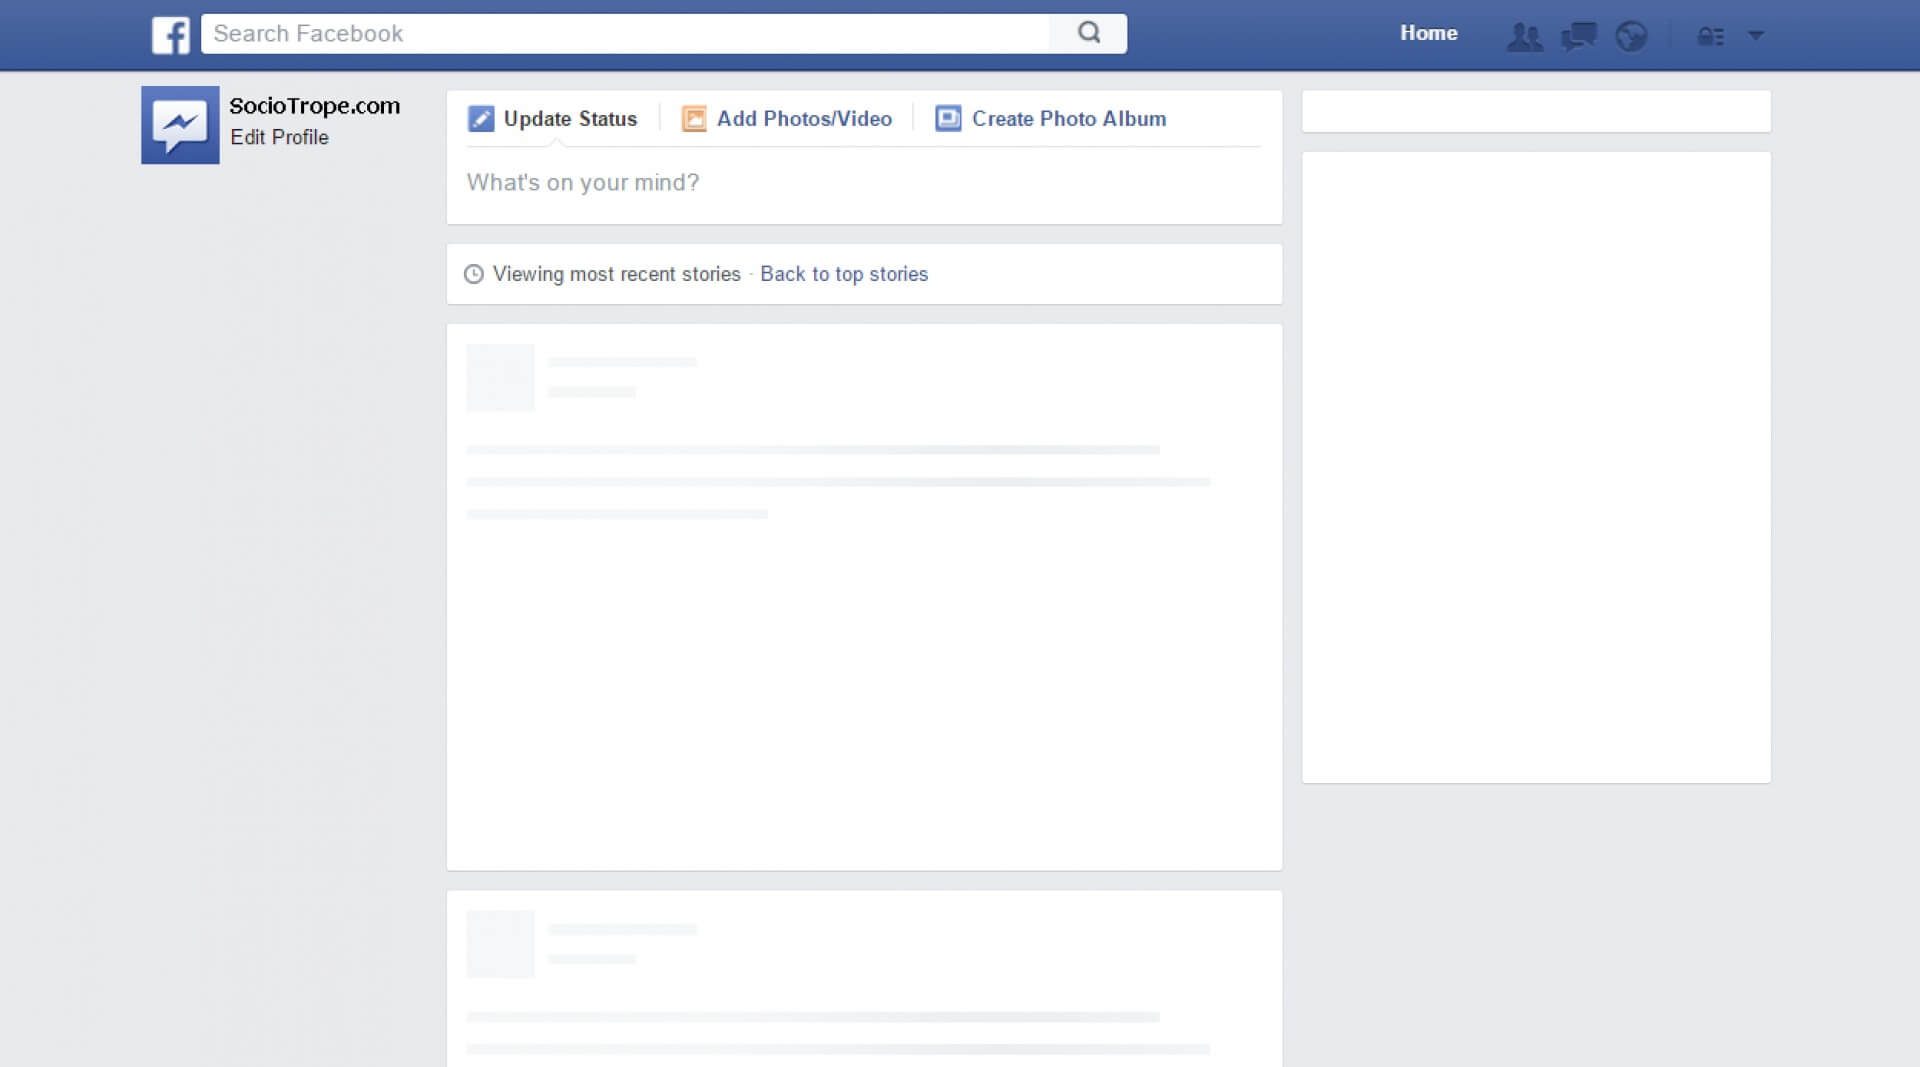 036 Facebook Profile Page Template Incredible Ideas Fb Html5 Pertaining To Html5 Blank Page Template